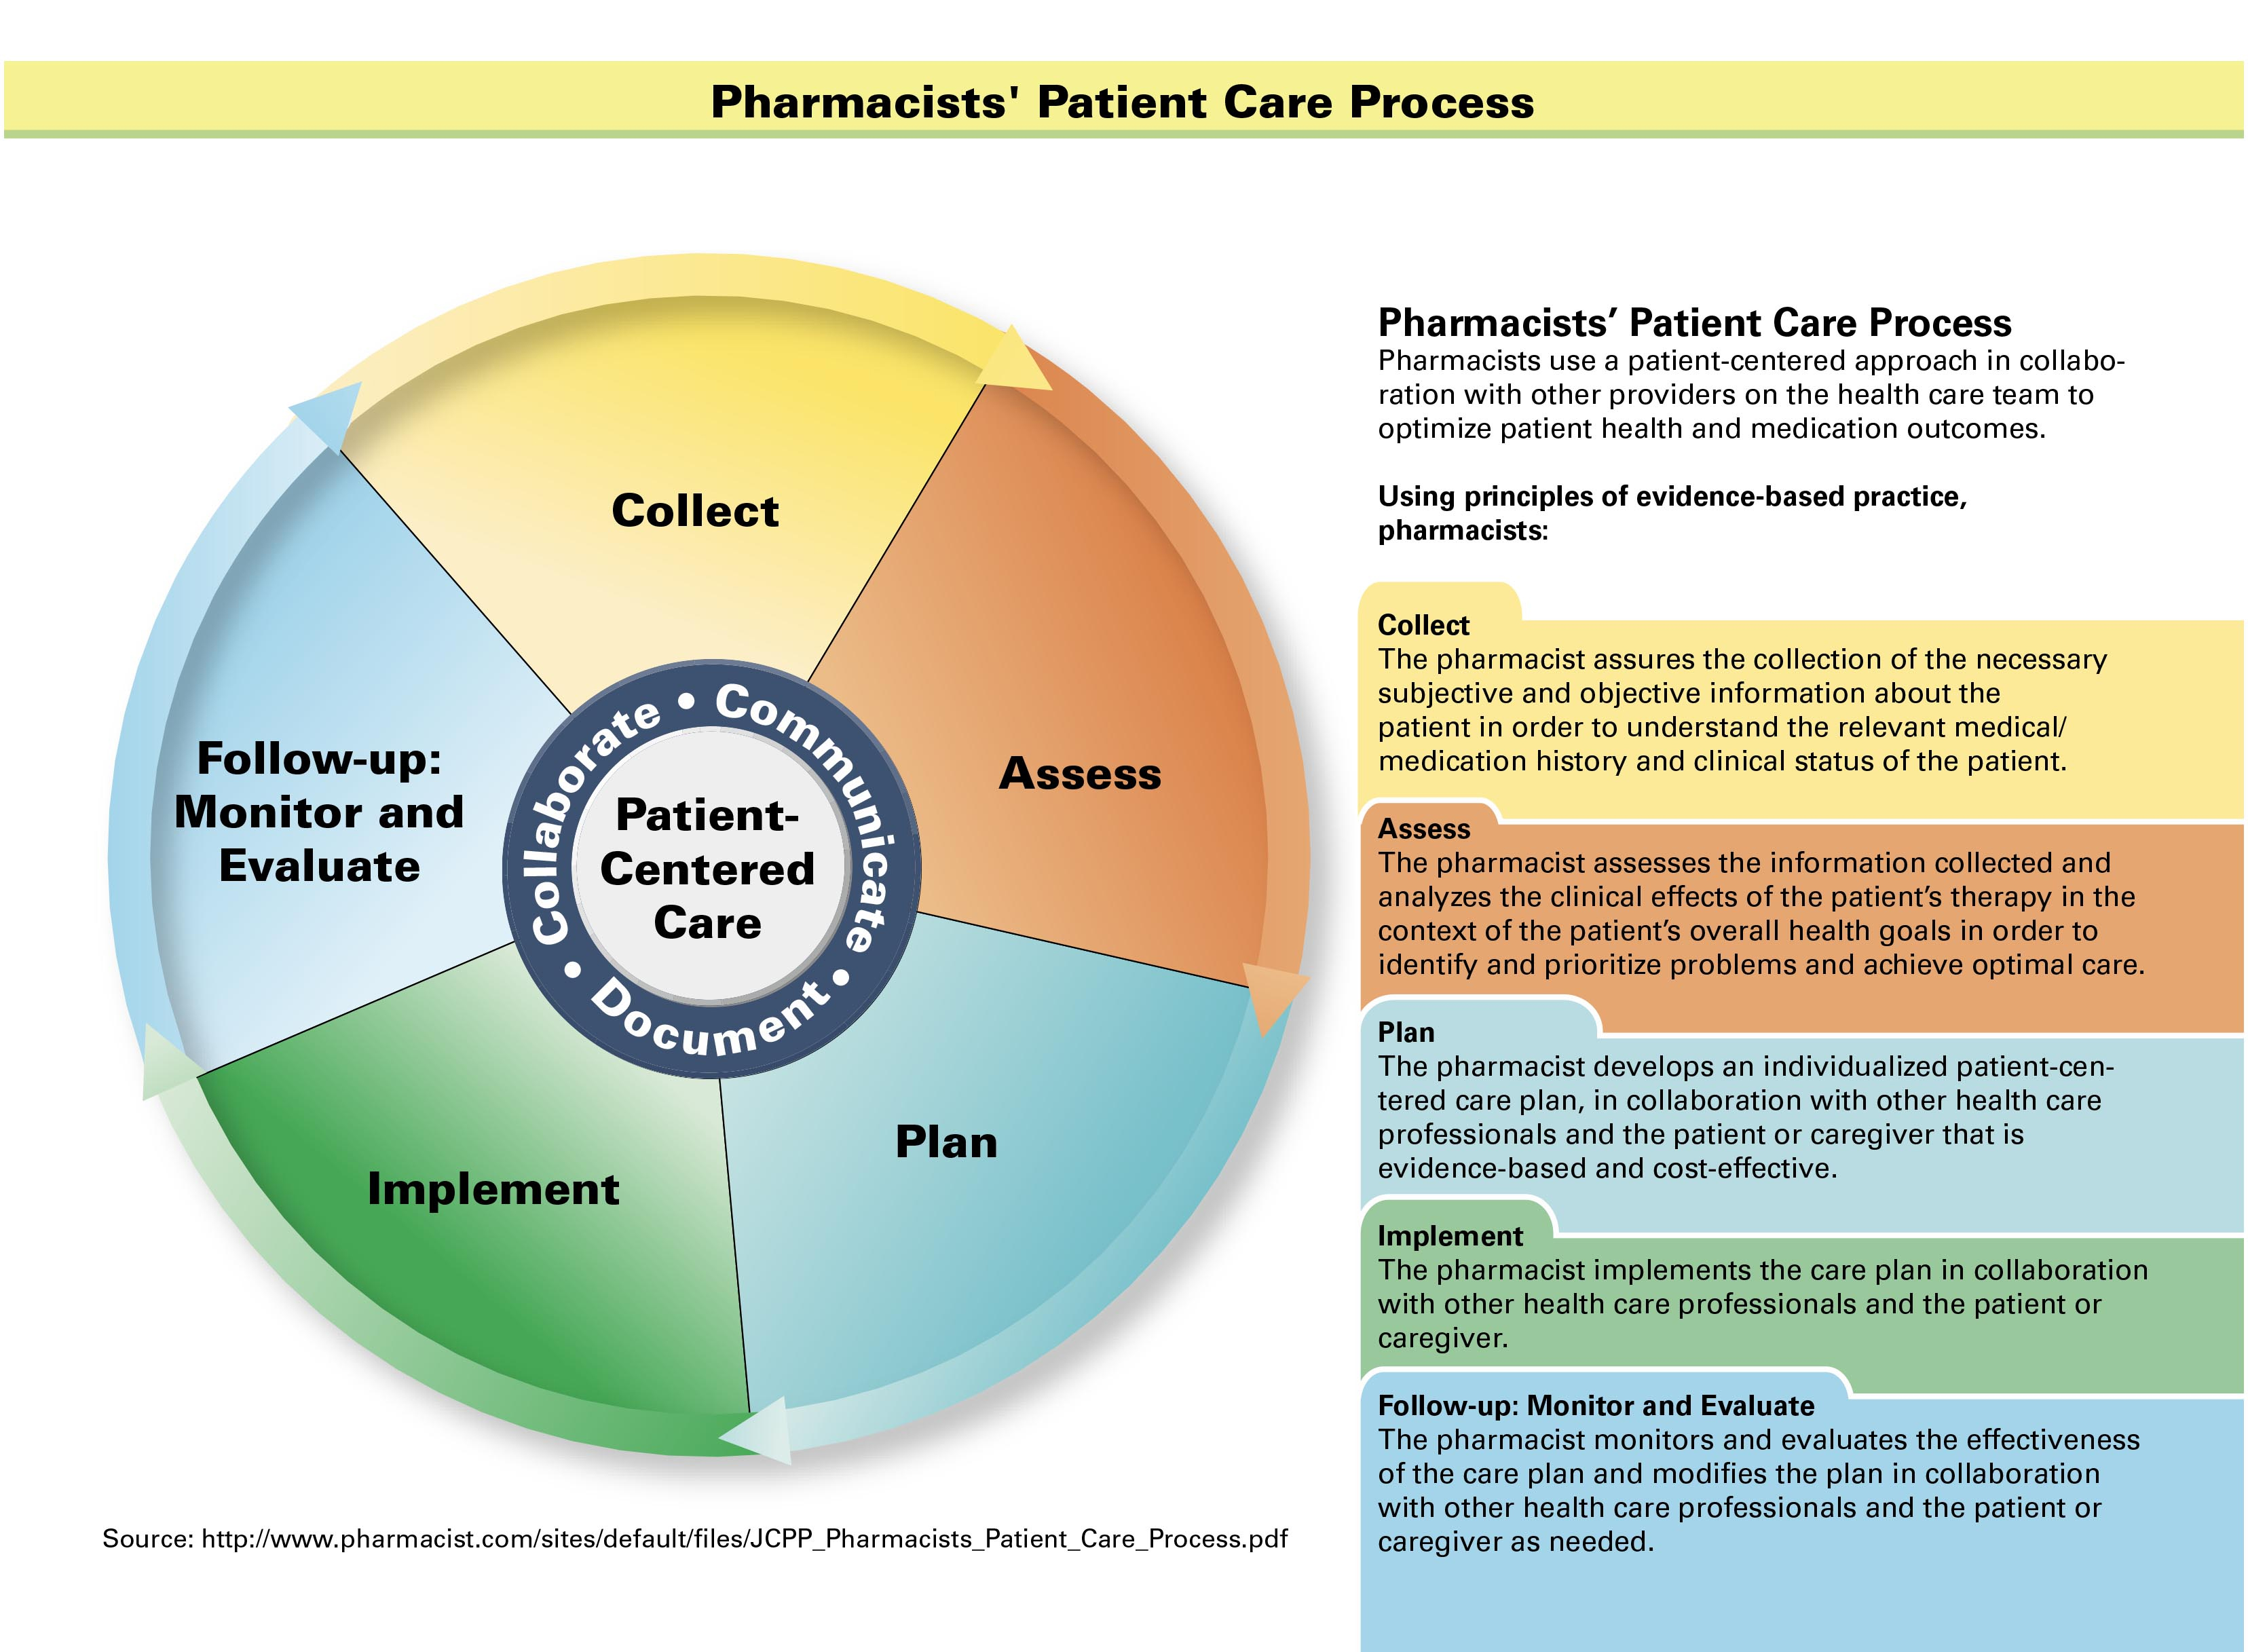 Pharmacists' Patient Care Process